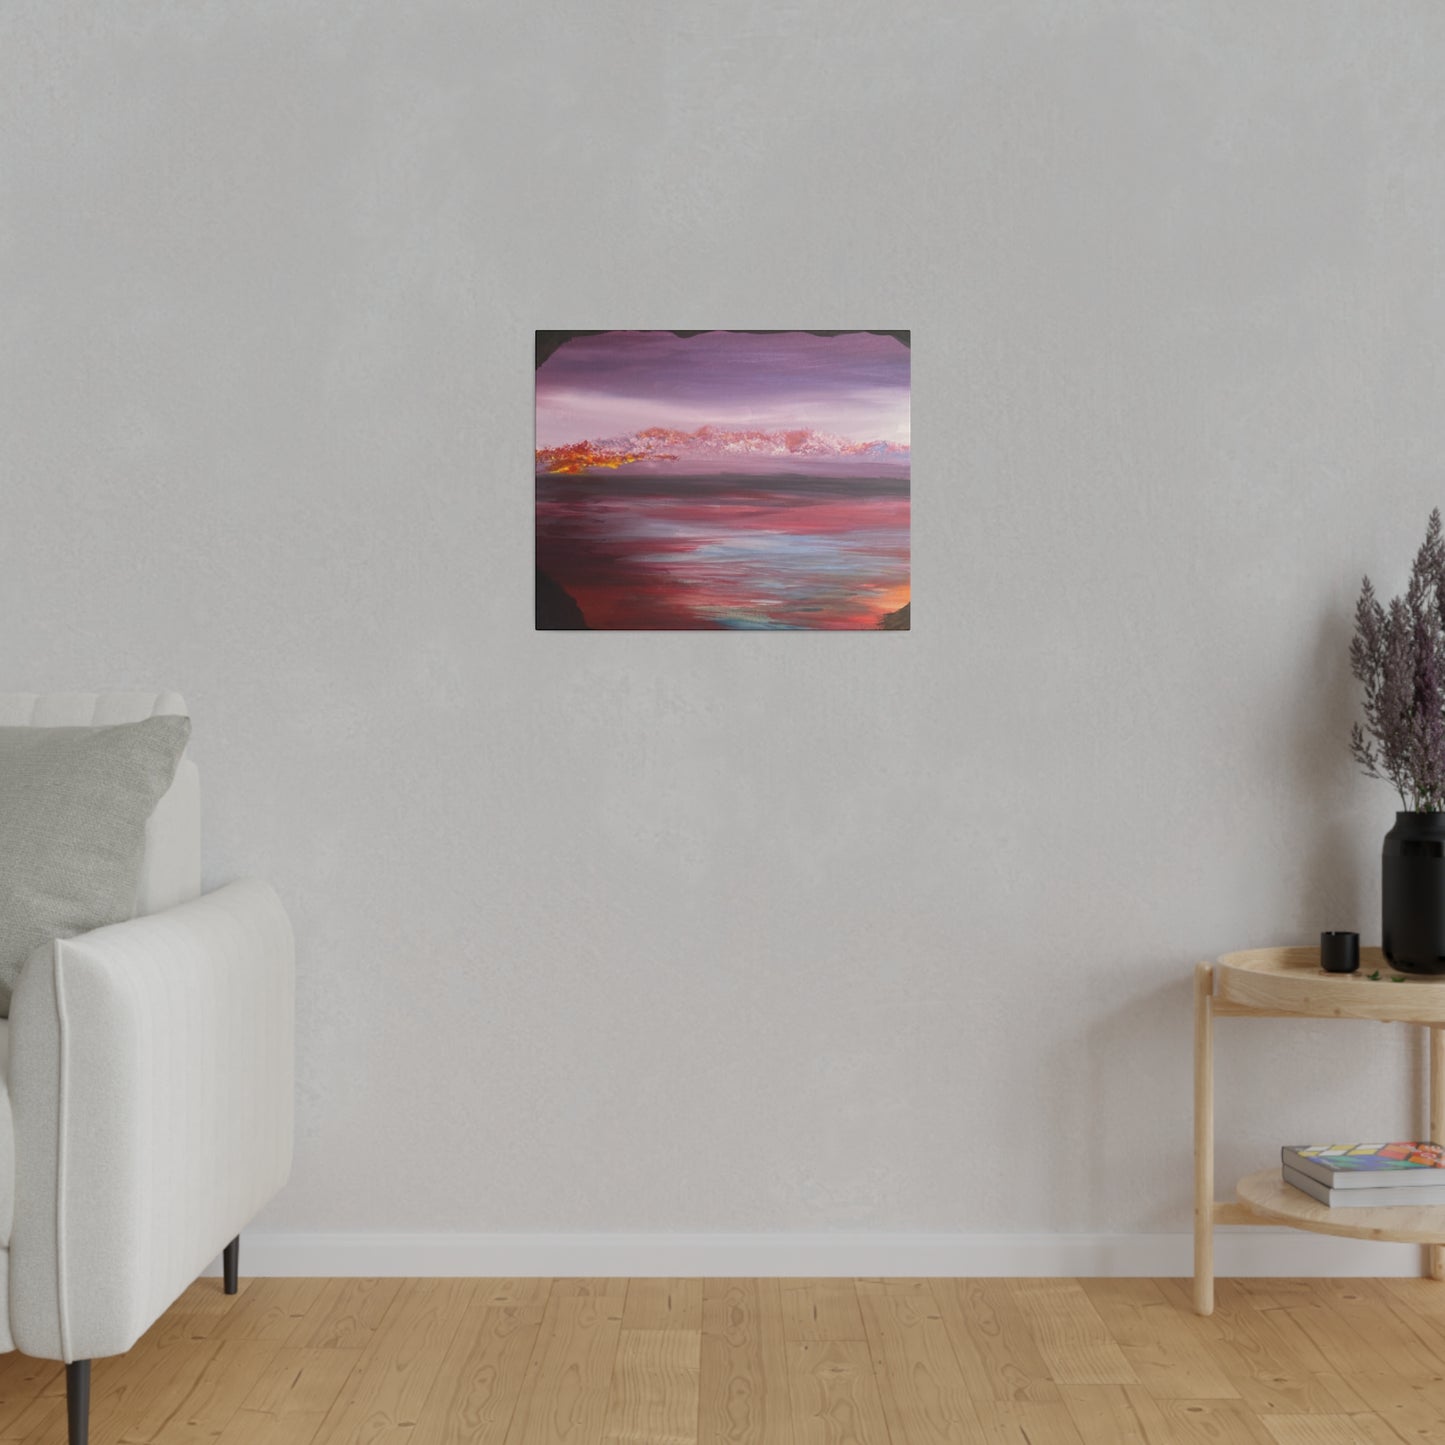 A Blended Evening Abstract Art Canvas Print